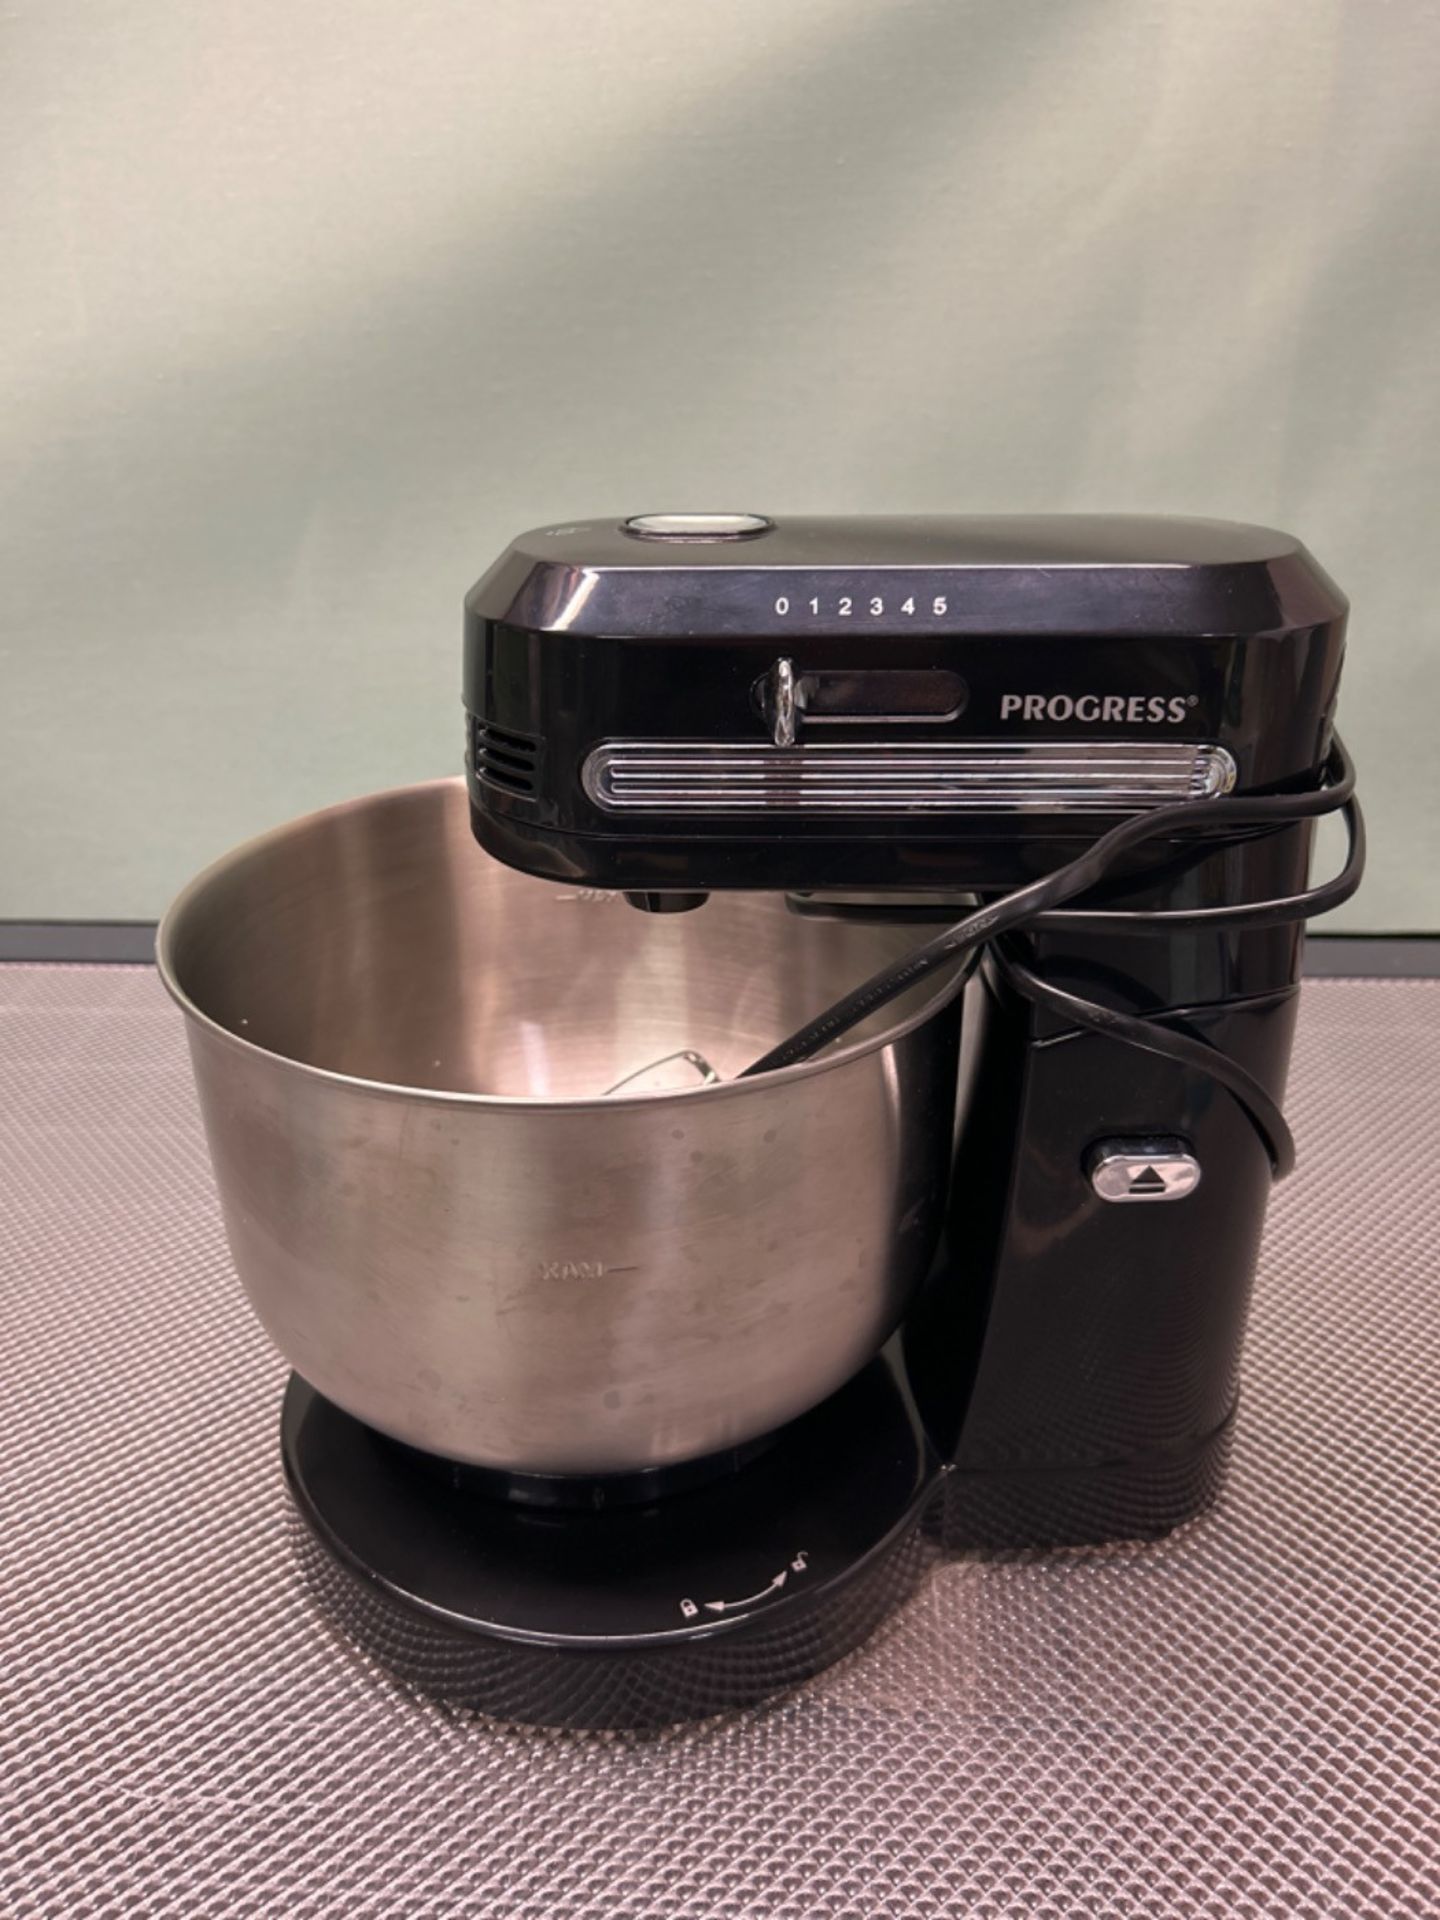 Progress EK4470P Electric Stand Mixer - 3.5L Rotating Stainless Steel Mixing Bowl, 5 Speeds, Includ - Image 2 of 3